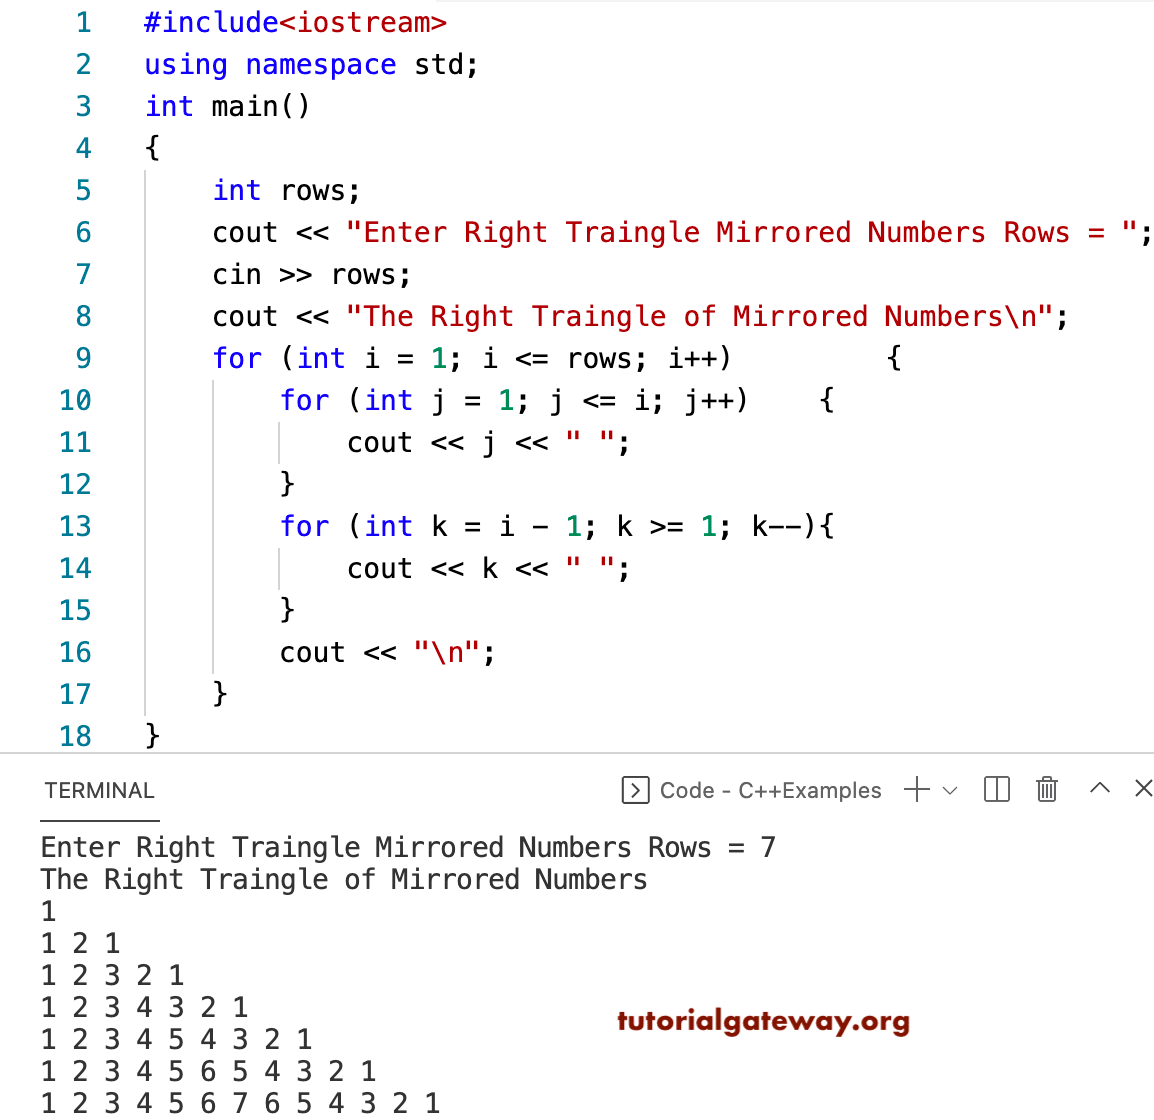 C++ Program to Print Right Triangle of Mirrored Numbers Pattern